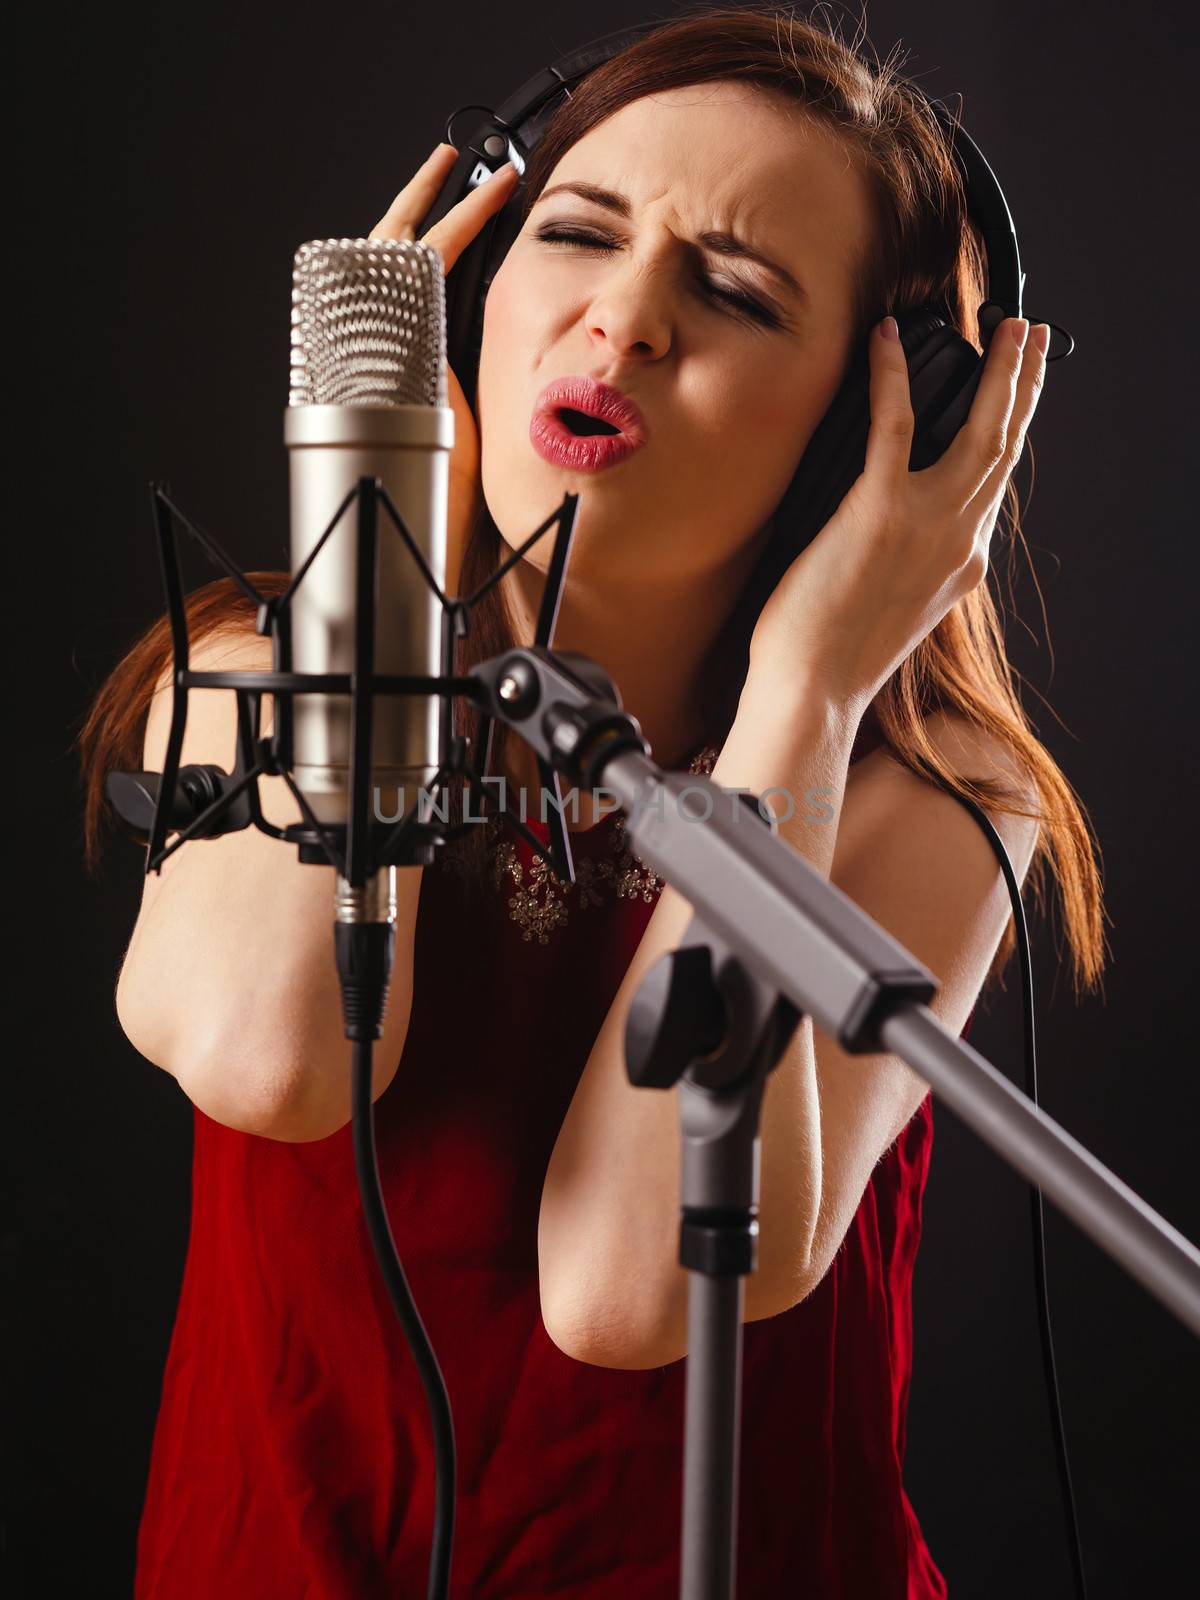 Photo of a beautiful woman singing into a large diaphragm microphone over dark background.